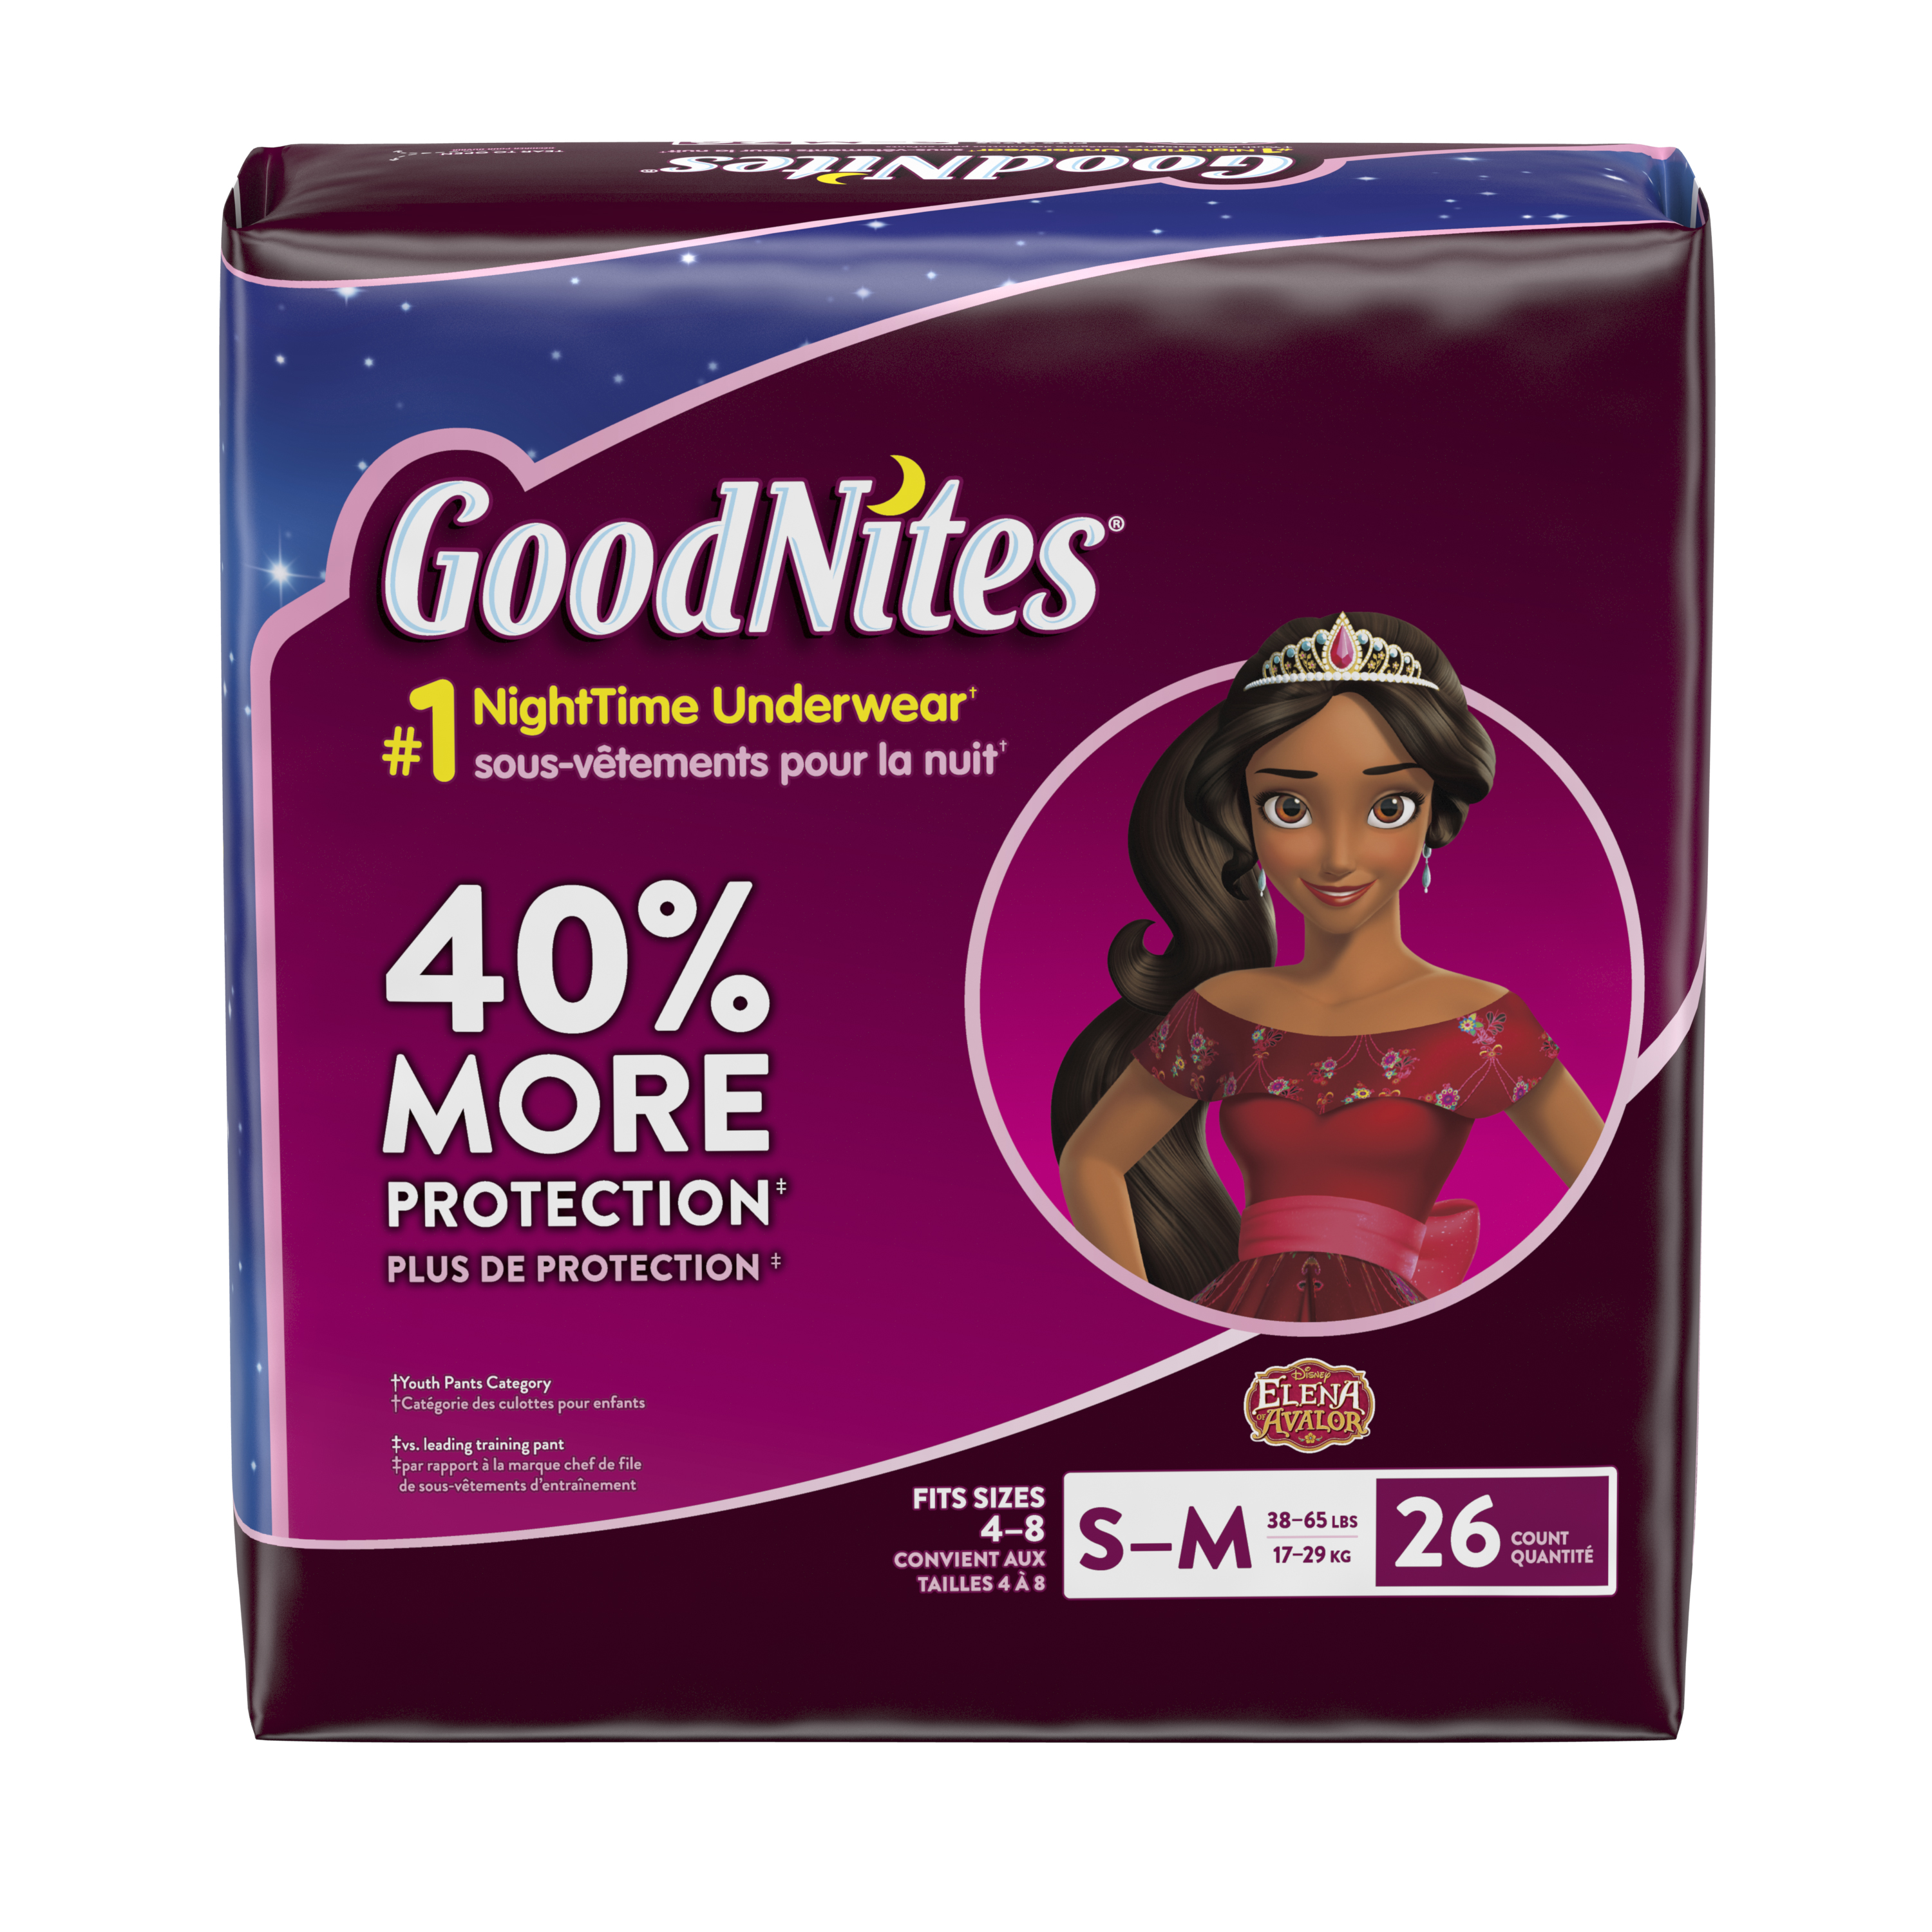 GoodNites Bedtime Bedwetting Underwear for Girls, Size S/M, 26 Count - image 1 of 10